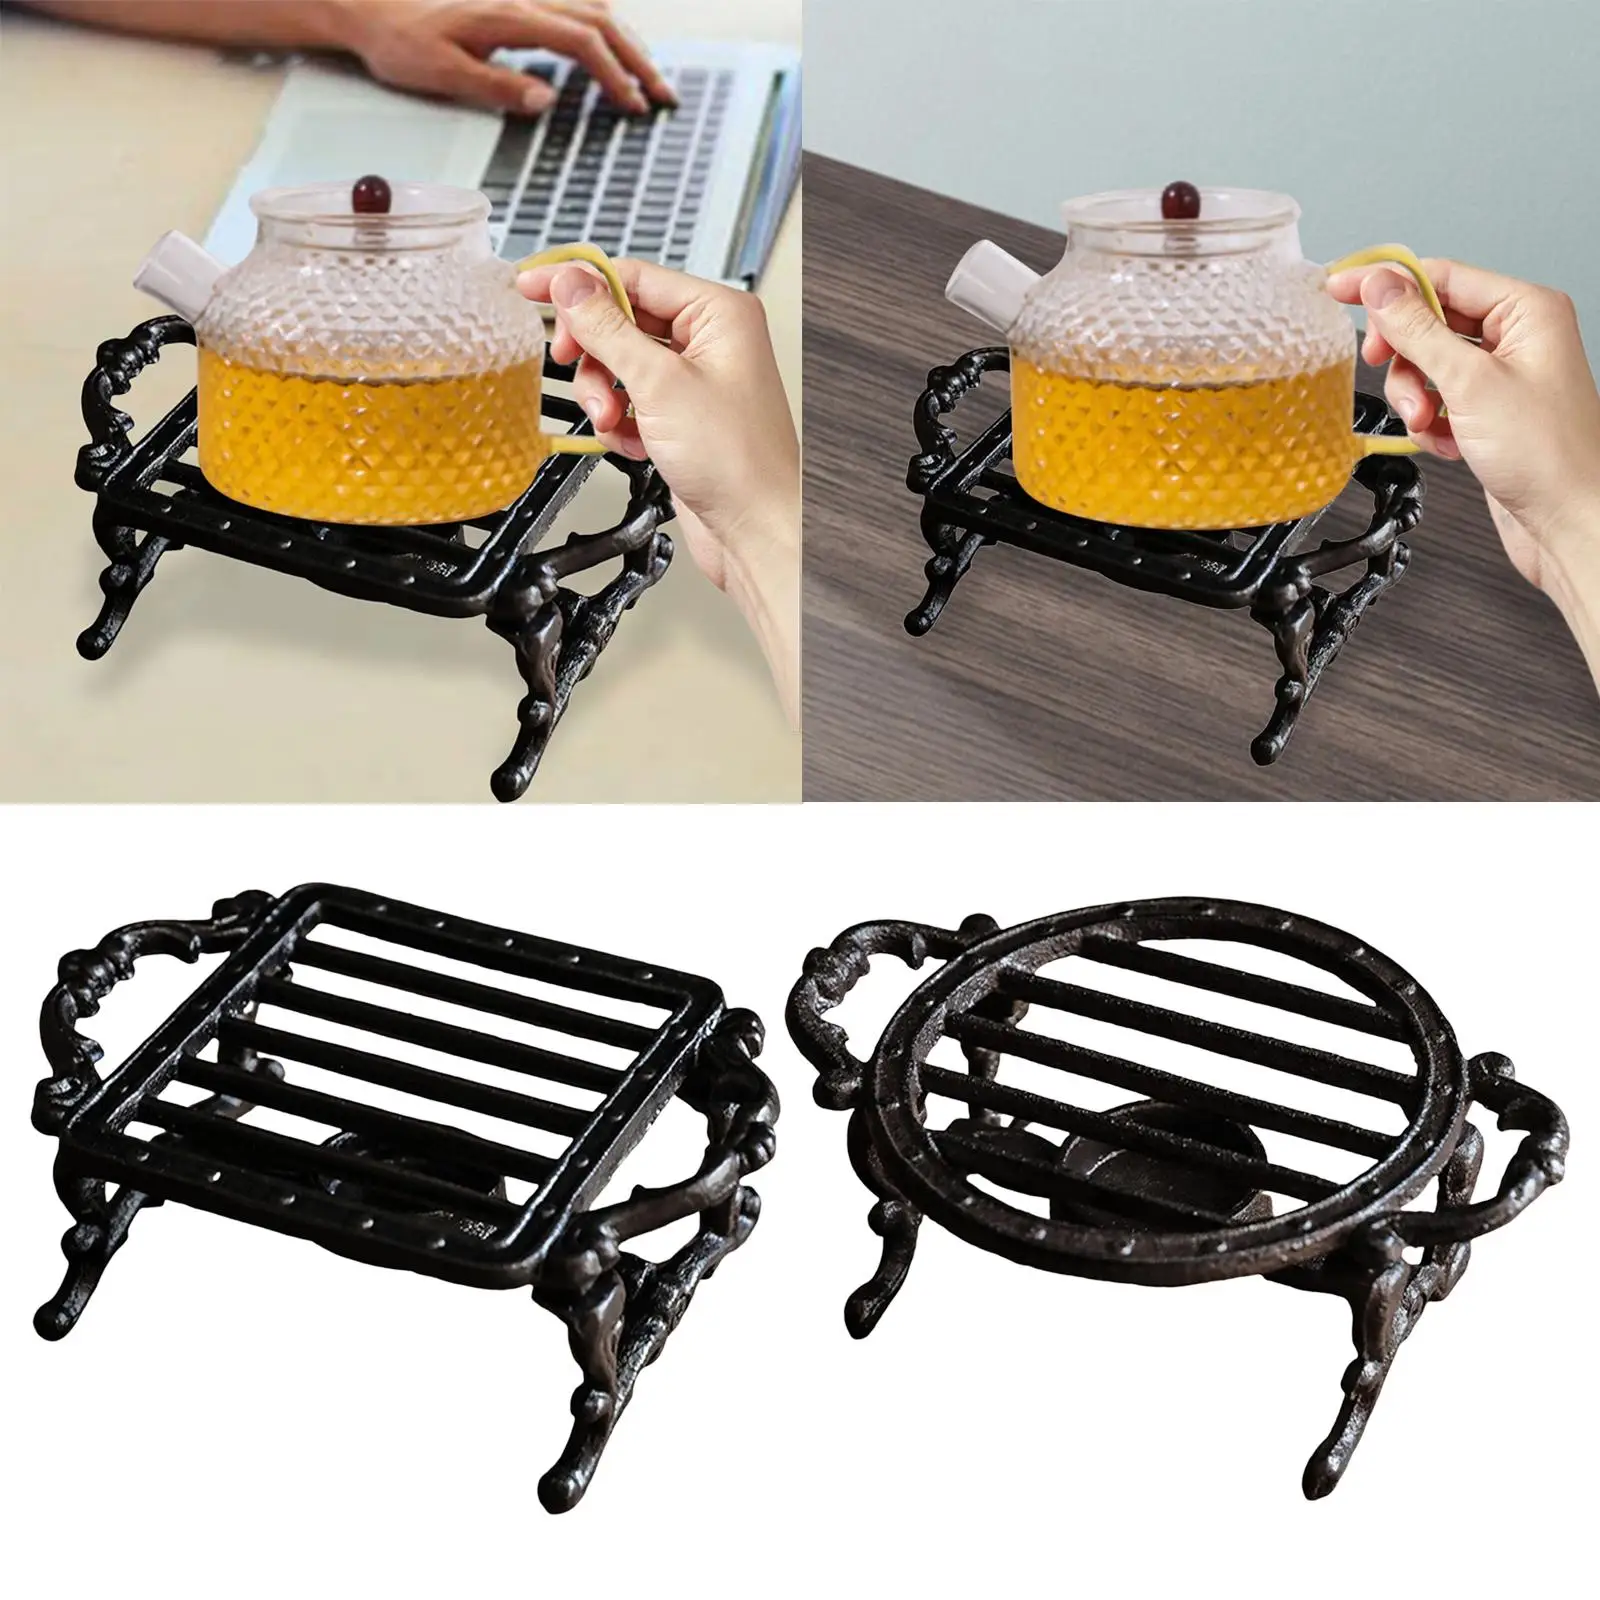 Portable Teapot Warmer Holder Decorative Candle Holder Stand Candle Warmer Heavy Duty Teapot Warmer for Home